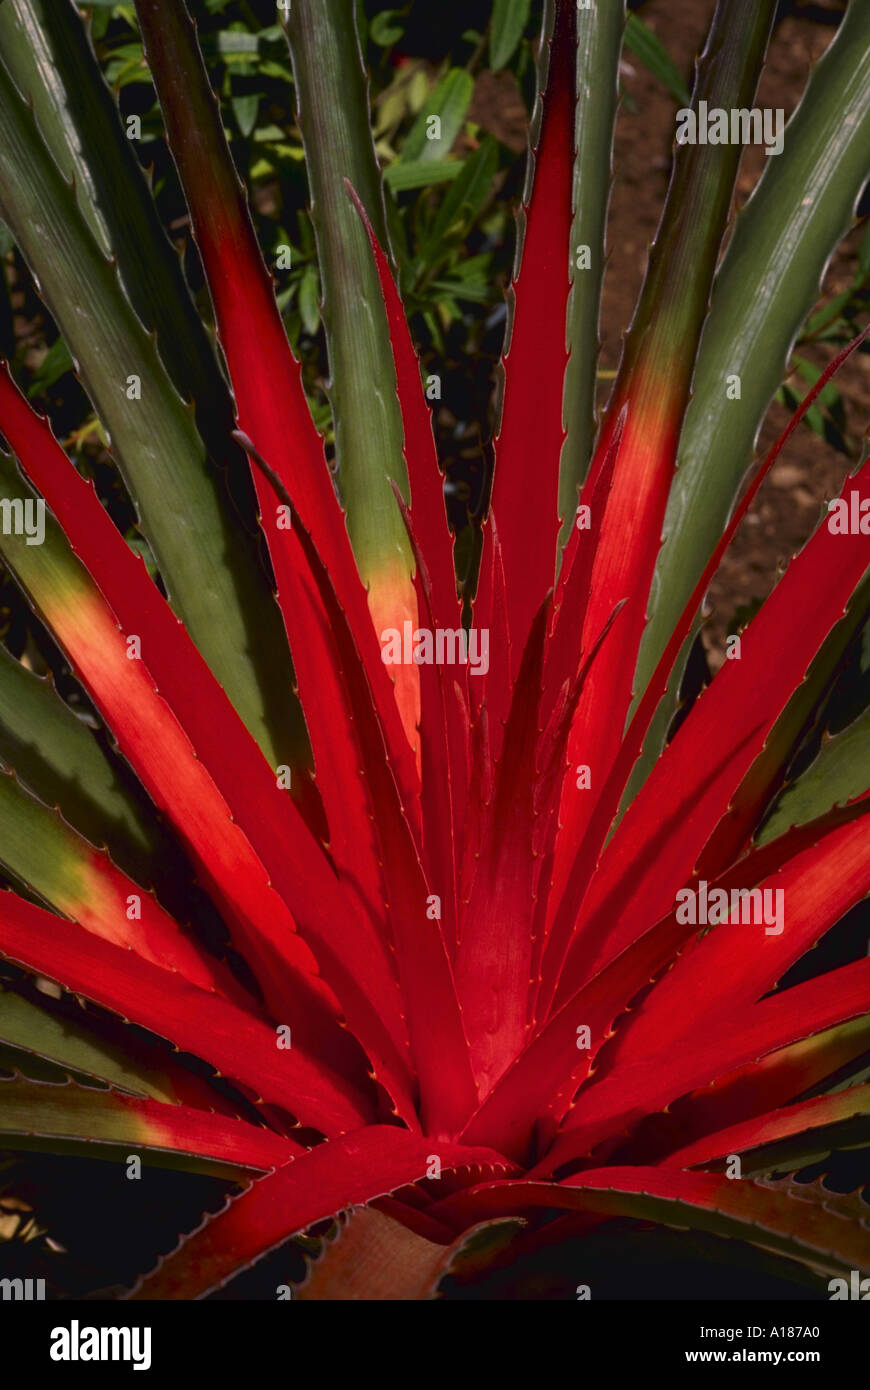 Close up of a red and green Aloe Vera plant in South Africa Stock Photo